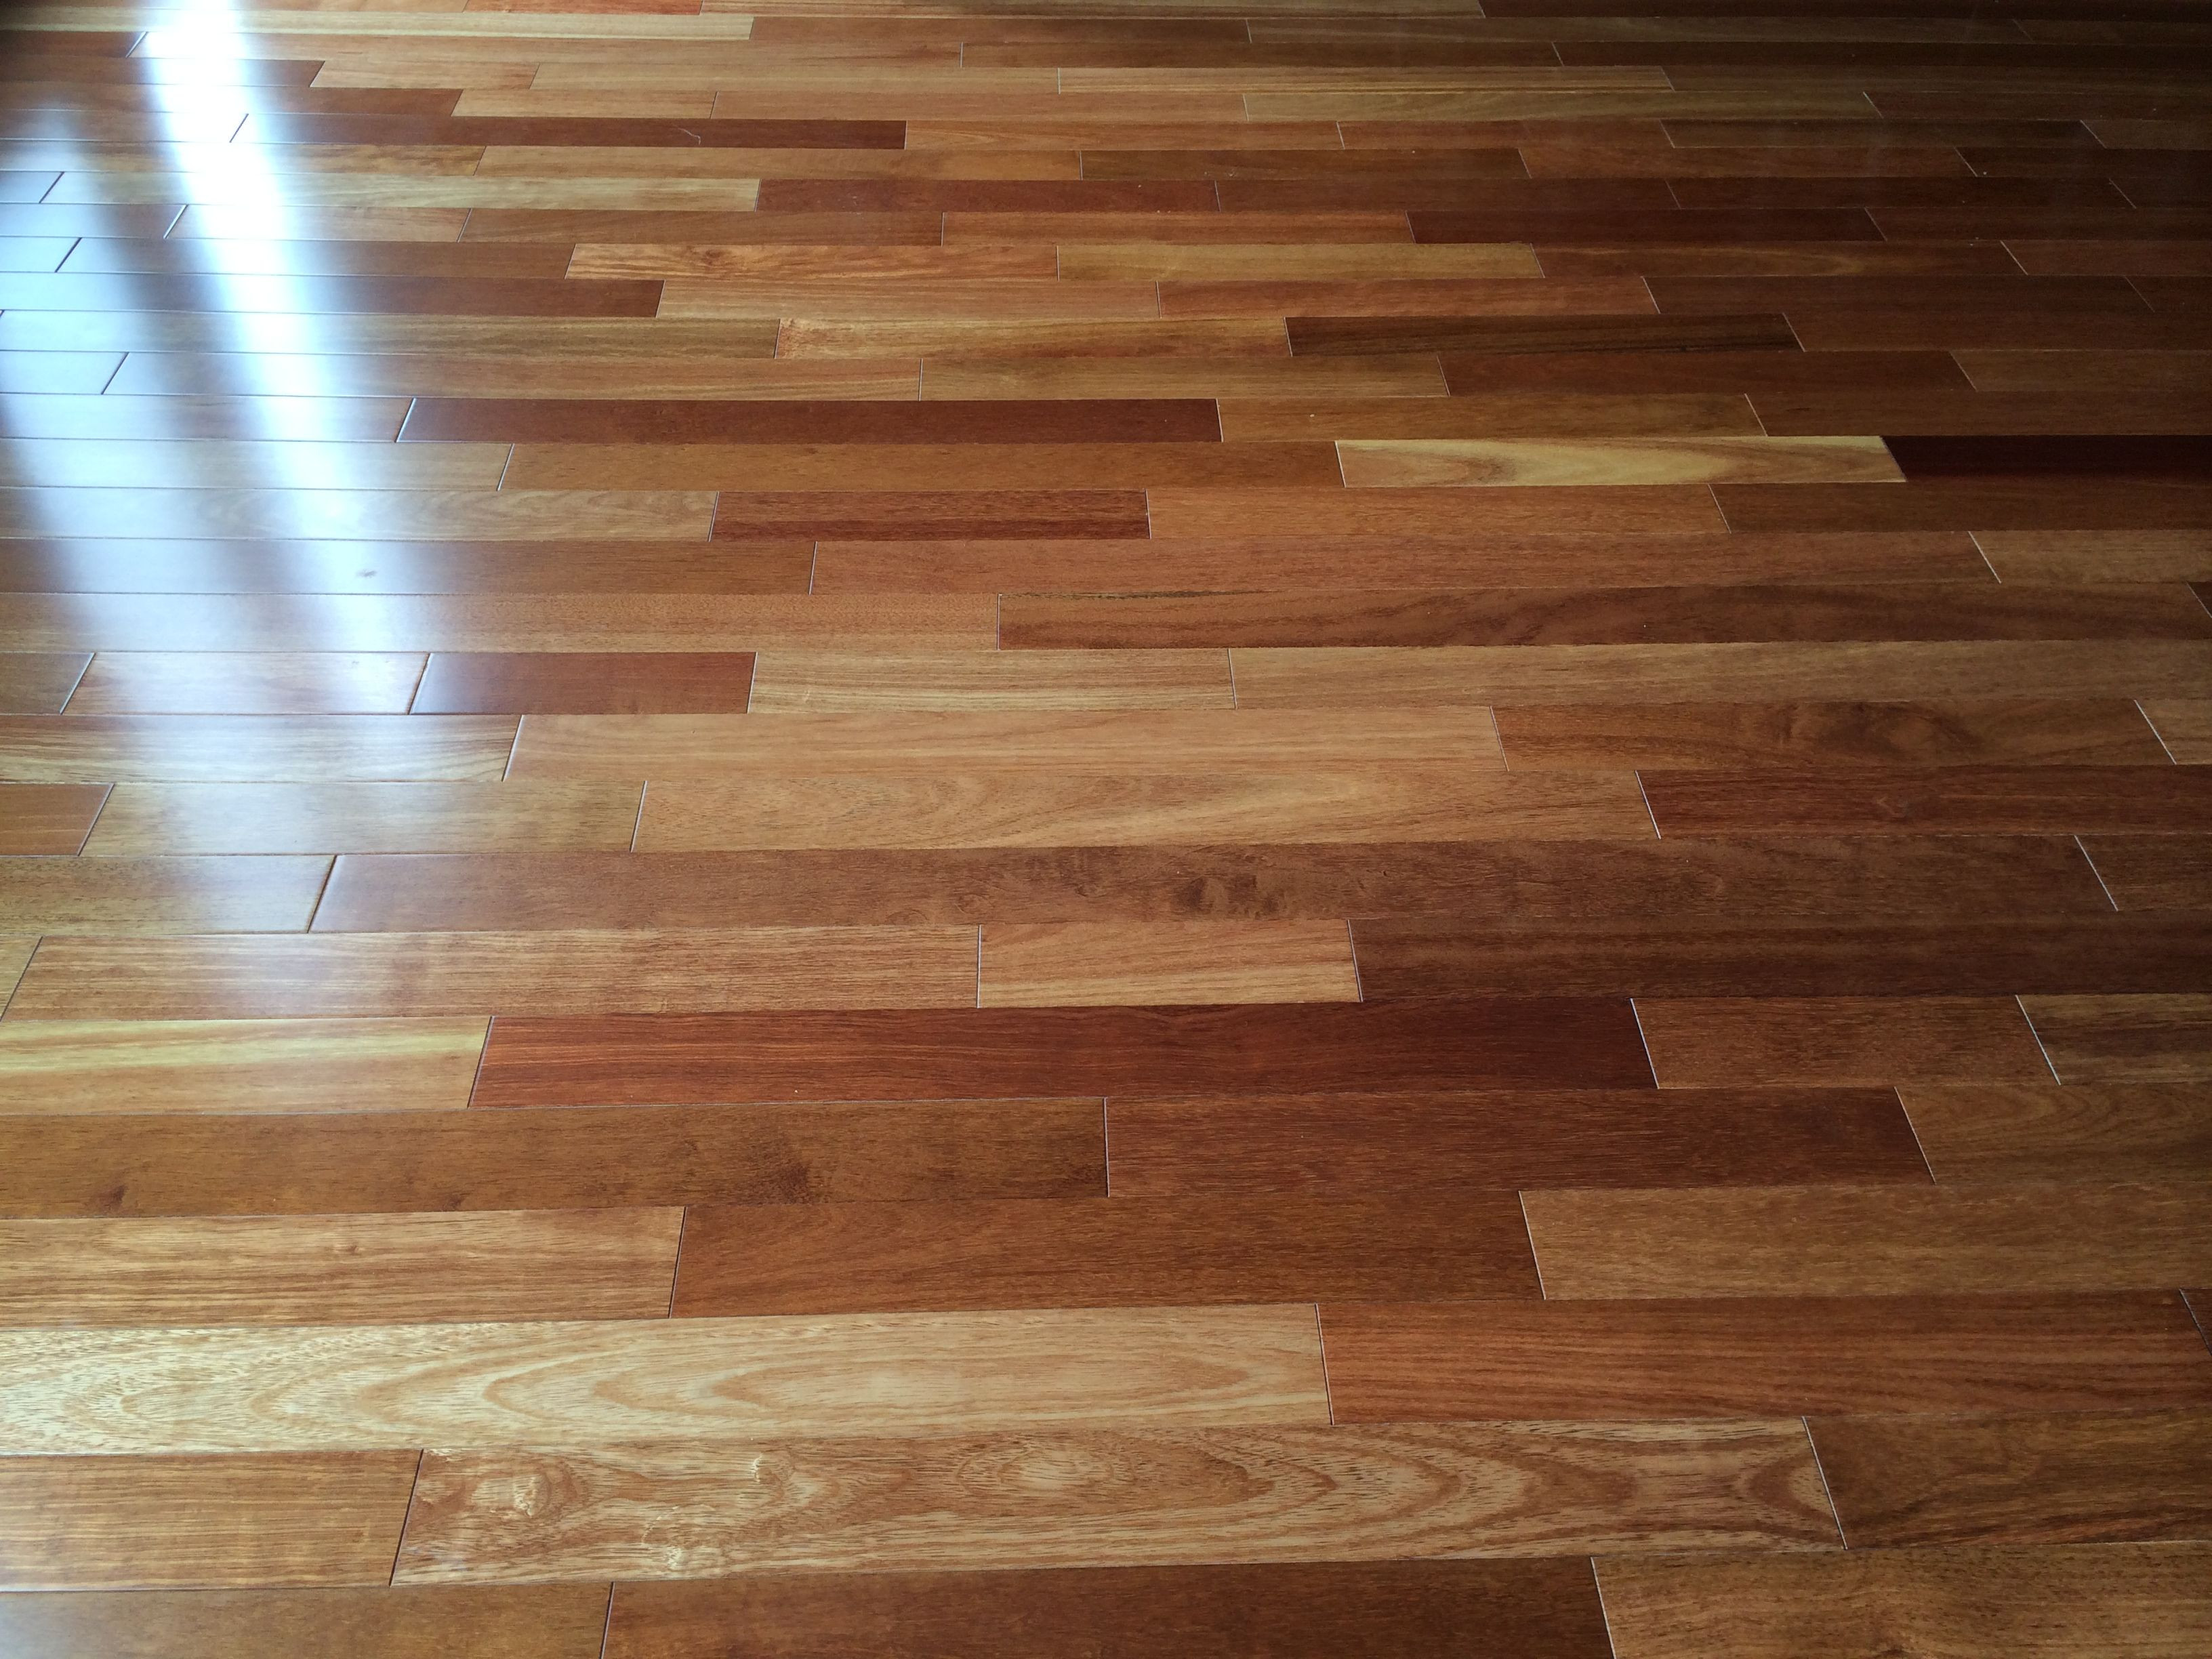 14 Great Cost to Refinish Prefinished Hardwood Floors 2024 free download cost to refinish prefinished hardwood floors of how to stain a floor 50 inspirational hardwood floor scrubber 50 s inside how to stain a floor level 2 prefinished hardwood natural